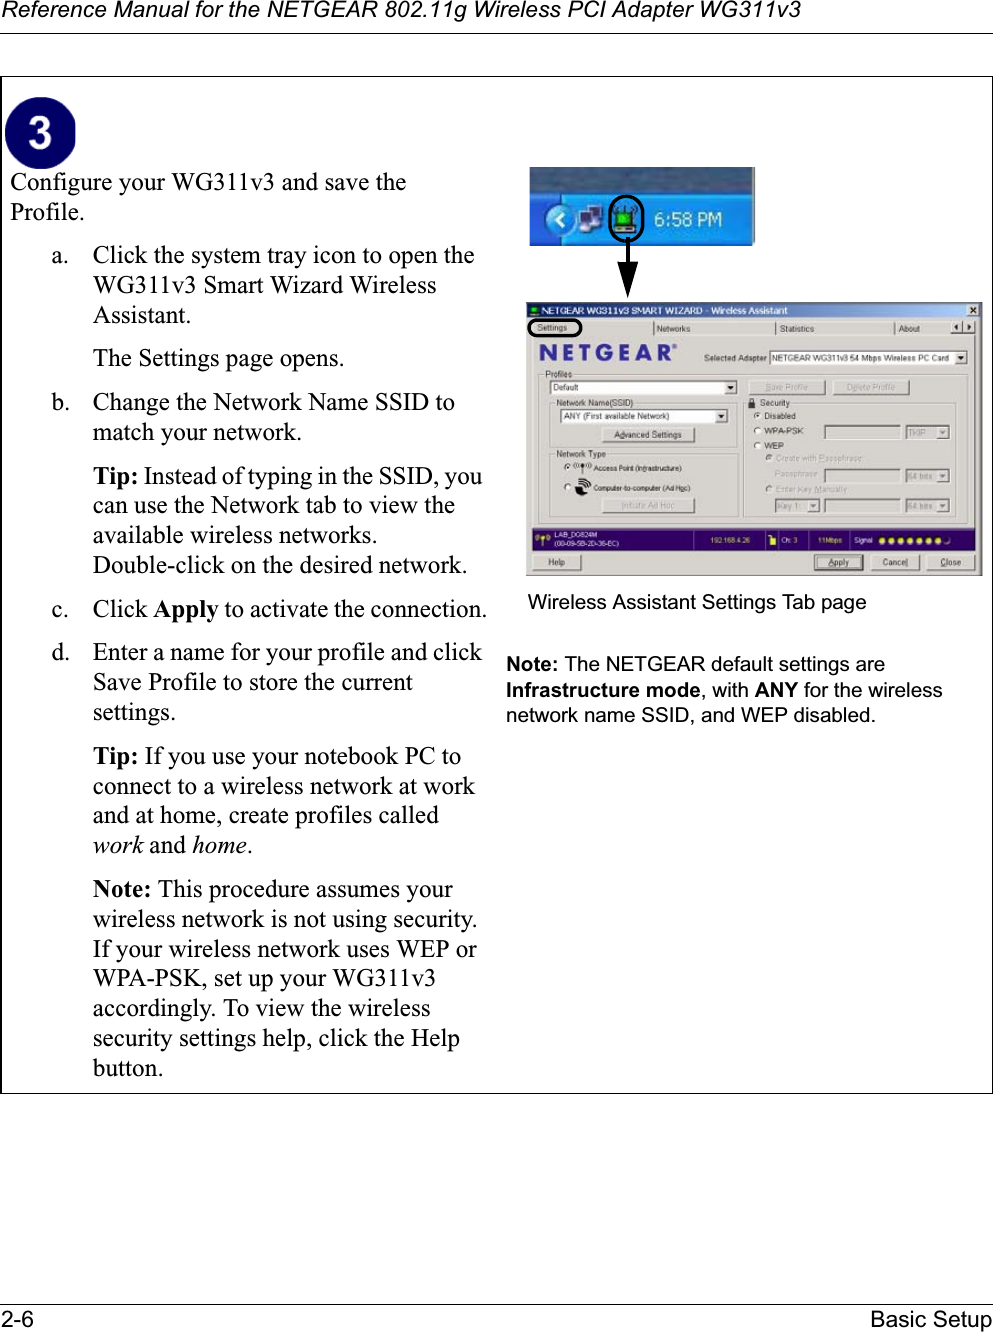 Reference Manual for the NETGEAR 802.11g Wireless PCI Adapter WG311v32-6 Basic SetupConfigure your WG311v3 and save theProfile.a. Click the system tray icon to open the WG311v3 Smart Wizard WirelessAssistant. The Settings page opens. b. Change the Network Name SSID to match your network.Tip: Instead of typing in the SSID, you can use the Network tab to view the available wireless networks. Double-click on the desired network.c. Click Apply to activate the connection.d. Enter a name for your profile and click Save Profile to store the current settings.Tip: If you use your notebook PC to connect to a wireless network at work and at home, create profiles called work and home.Note: This procedure assumes your wireless network is not using security. If your wireless network uses WEP or WPA-PSK, set up your WG311v3accordingly. To view the wireless security settings help, click the Help button.Note: The NETGEAR default settings are Infrastructure mode, with ANY for the wireless network name SSID, and WEP disabled.Wireless Assistant Settings Tab page